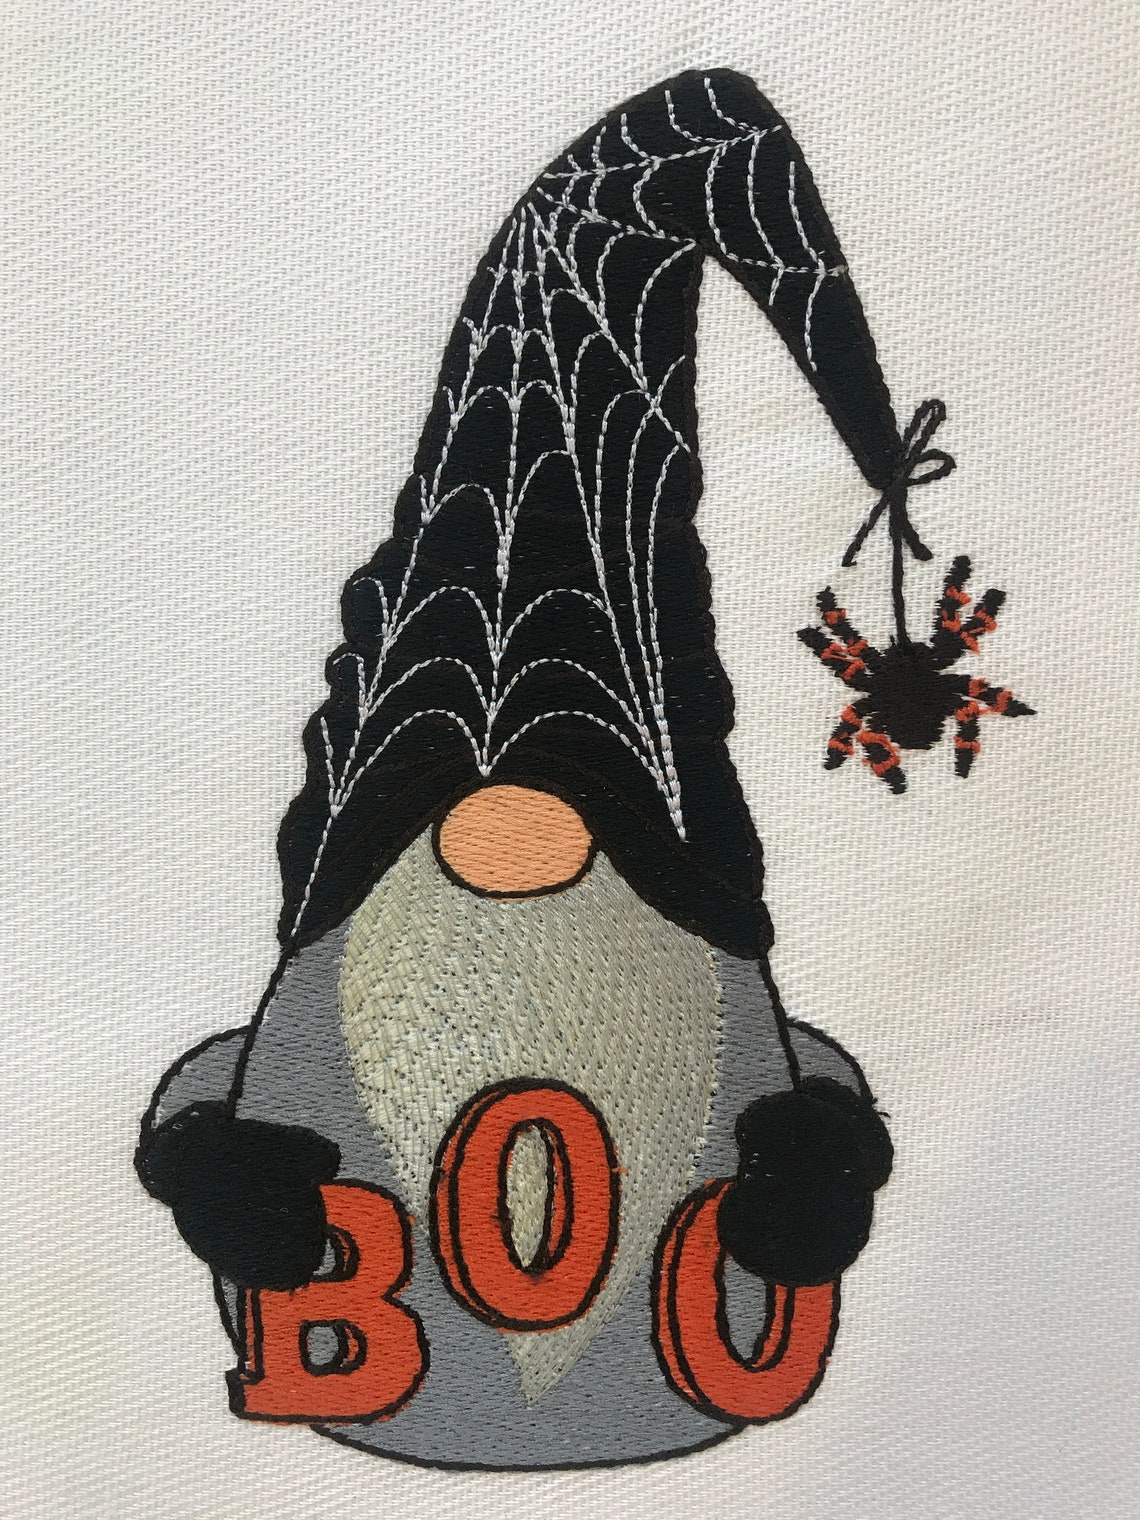 Embroidery Designs Halloween